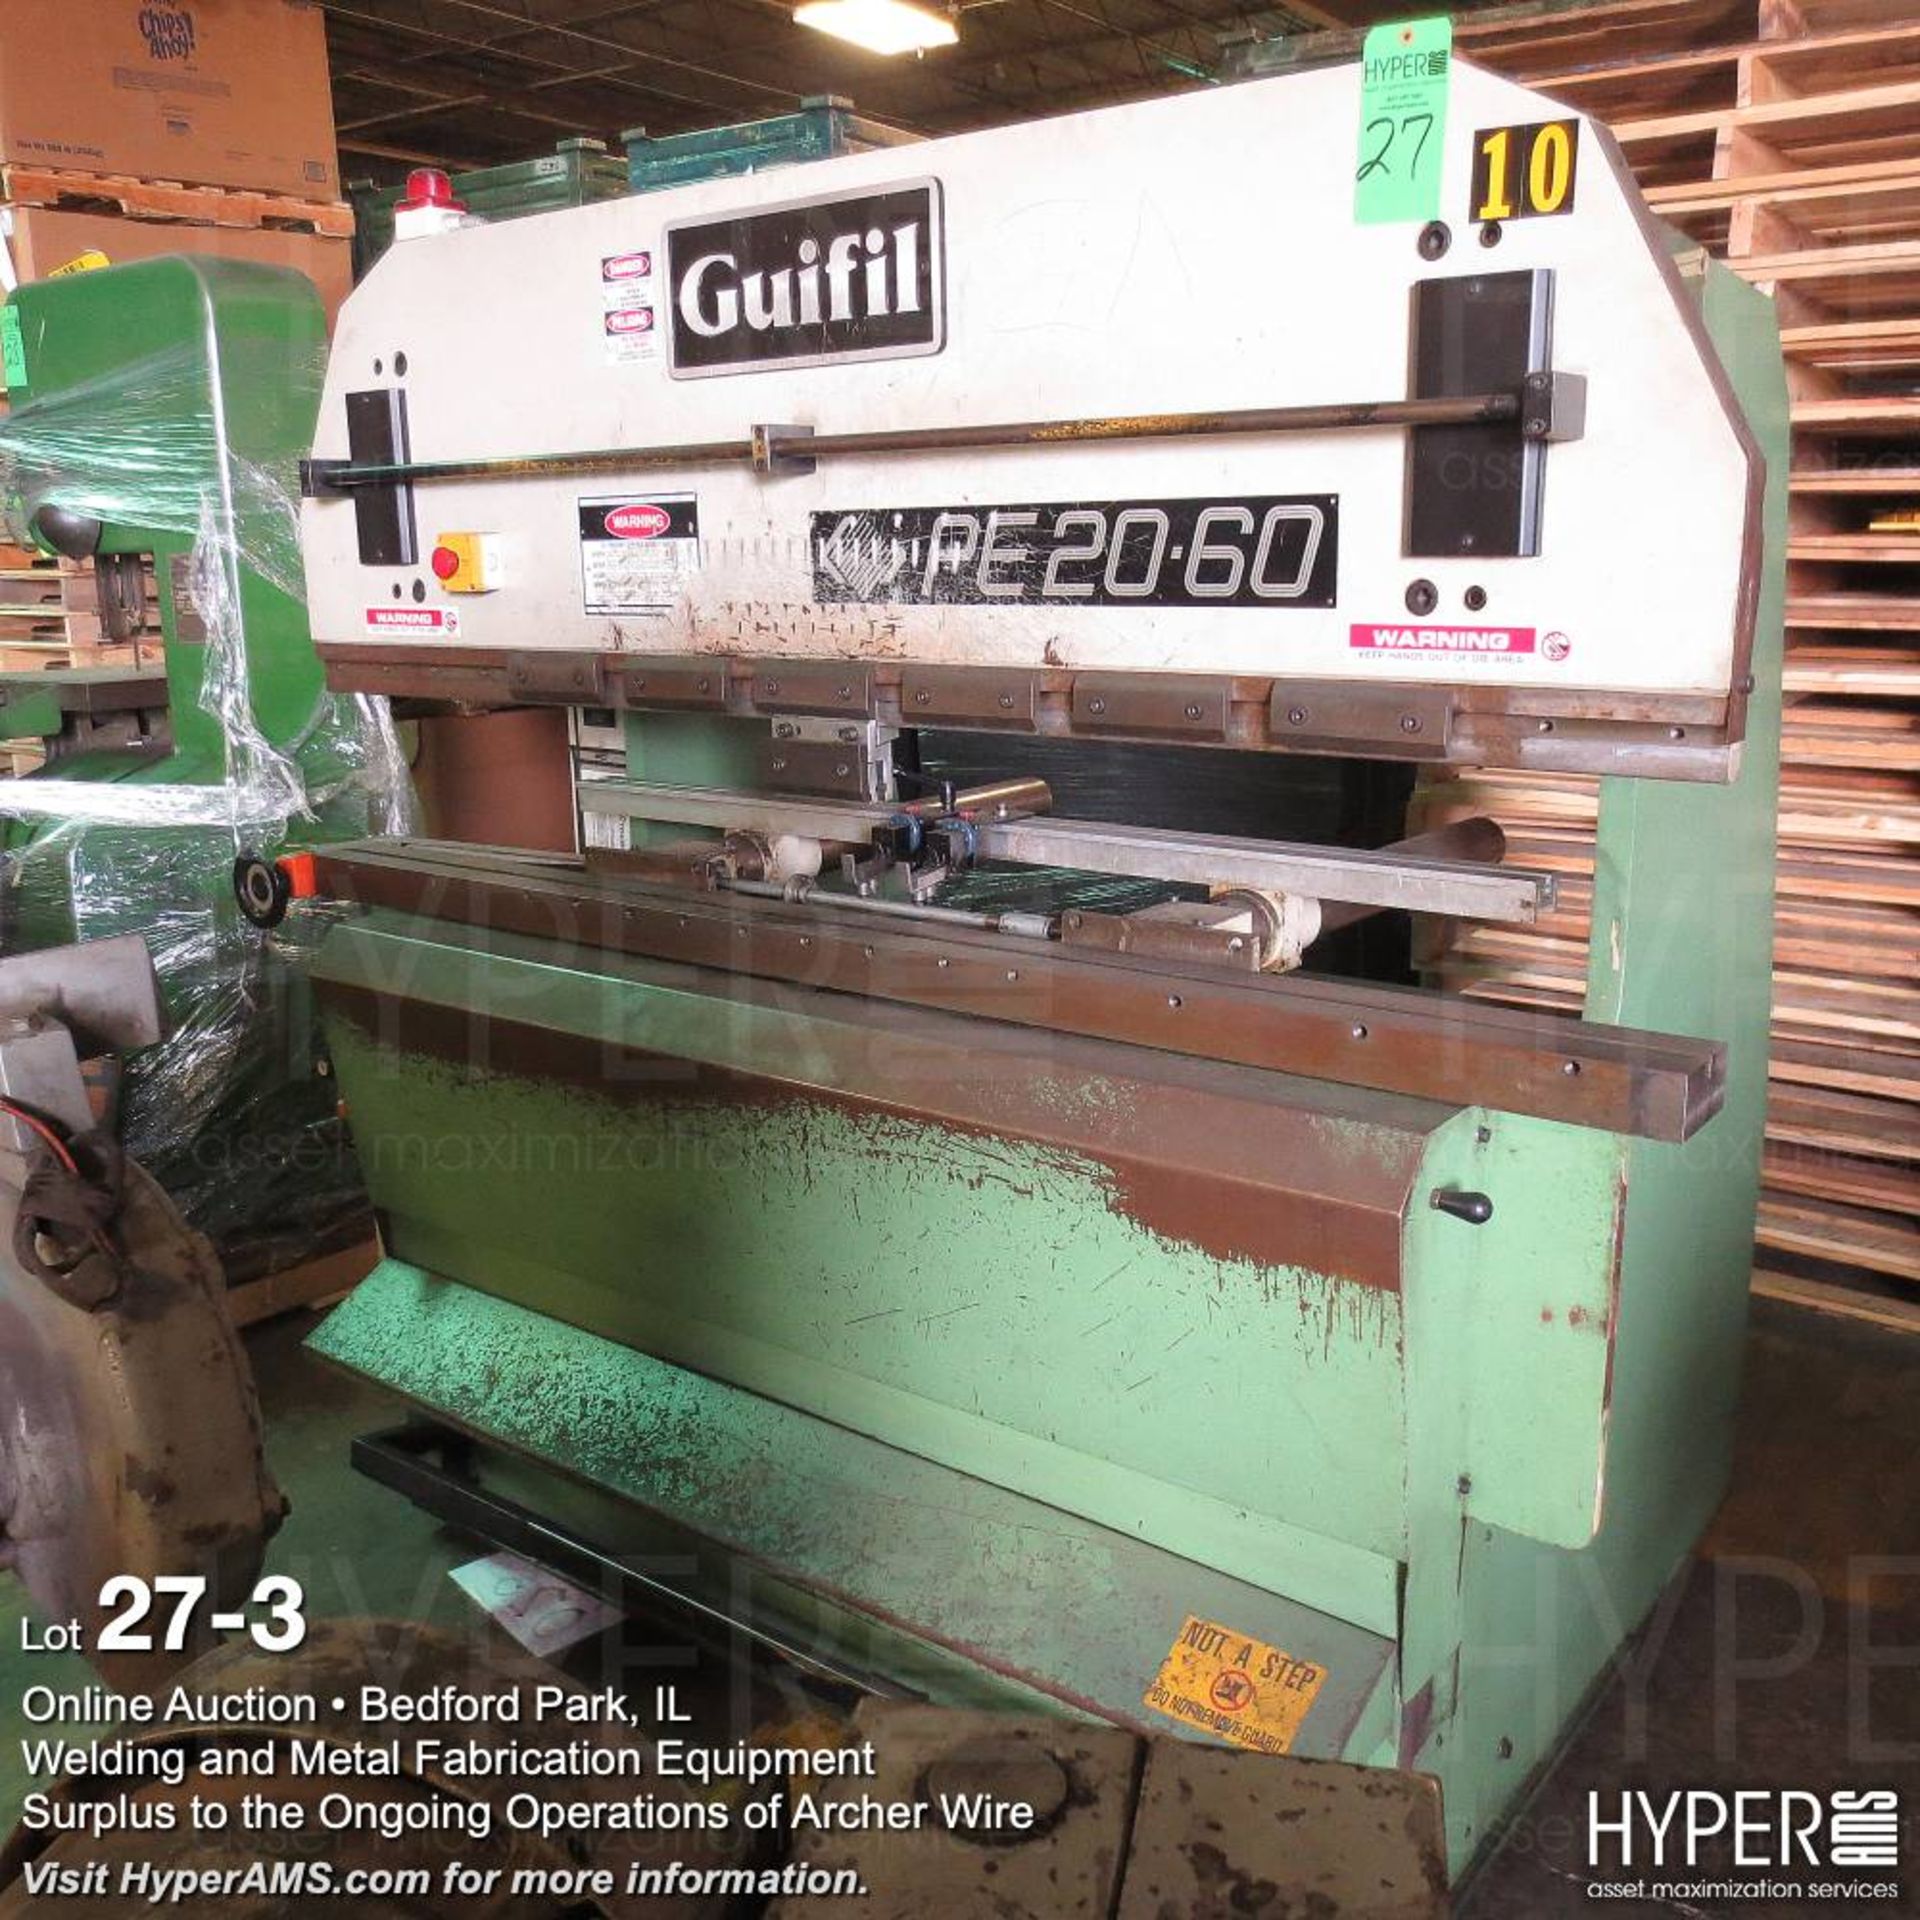 Guifil 66ton cap hydraulic press brake 79" bed, stroke 3.93, year 1993, number 013394, back gage, RE